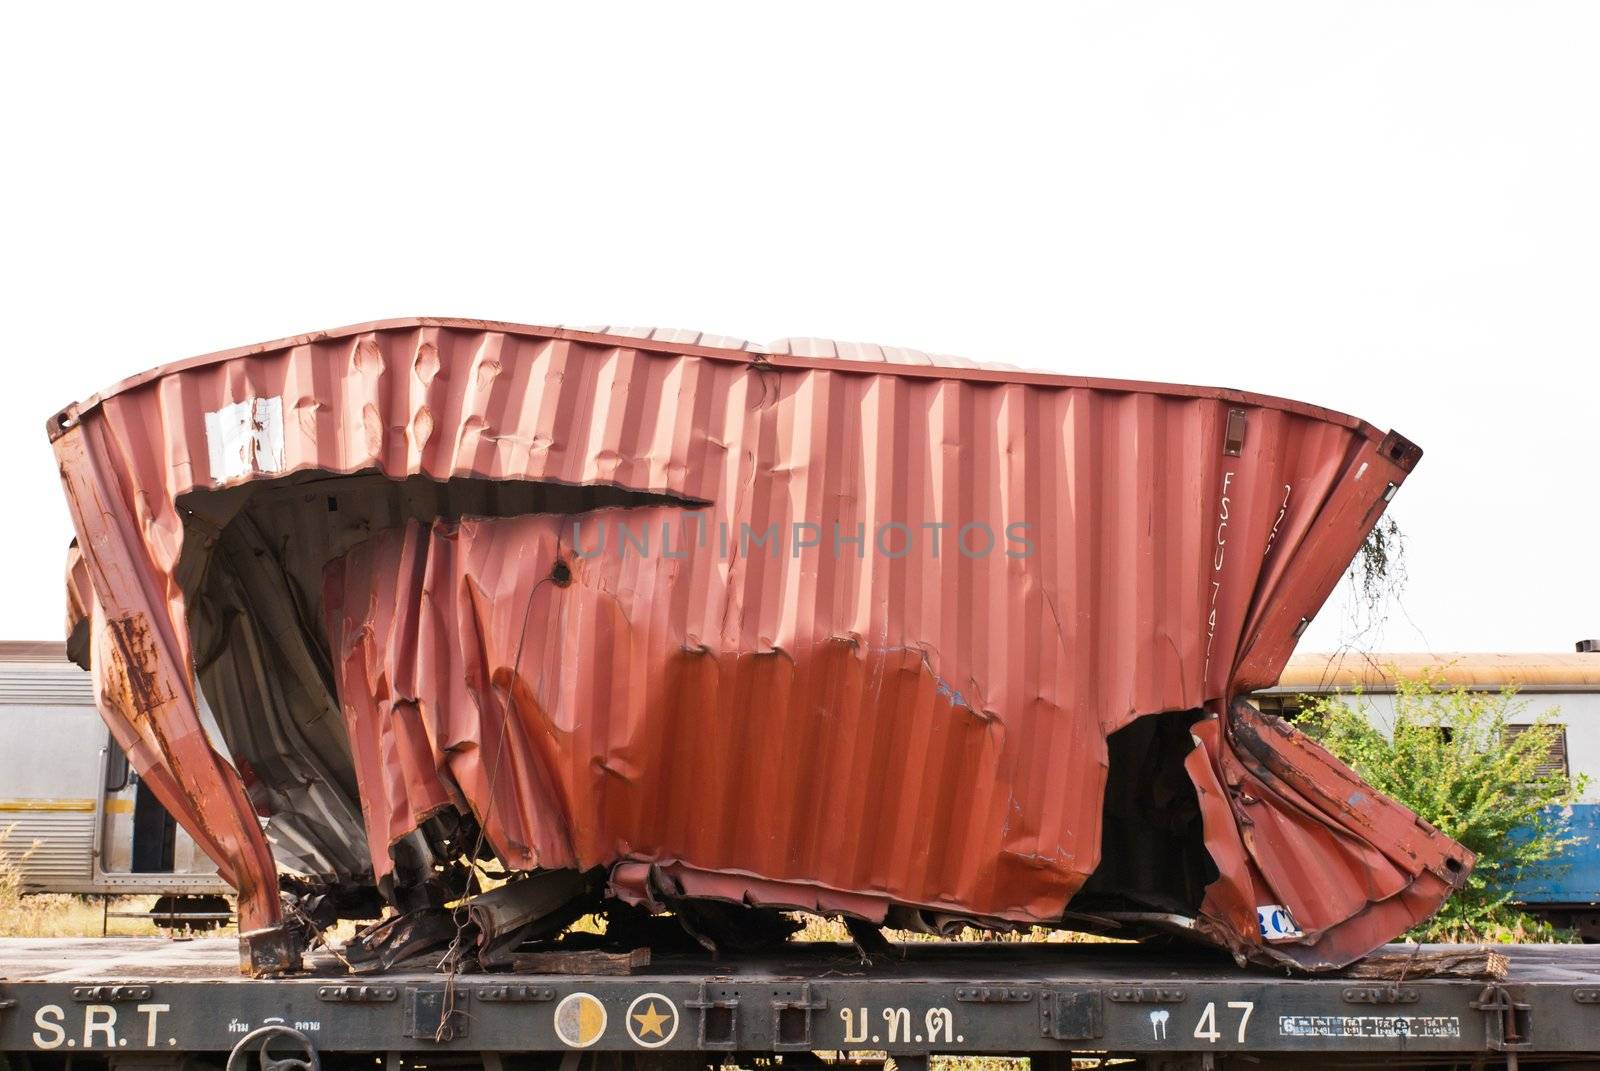 A wrackage of red steel container taken from train yard on a sunny day
